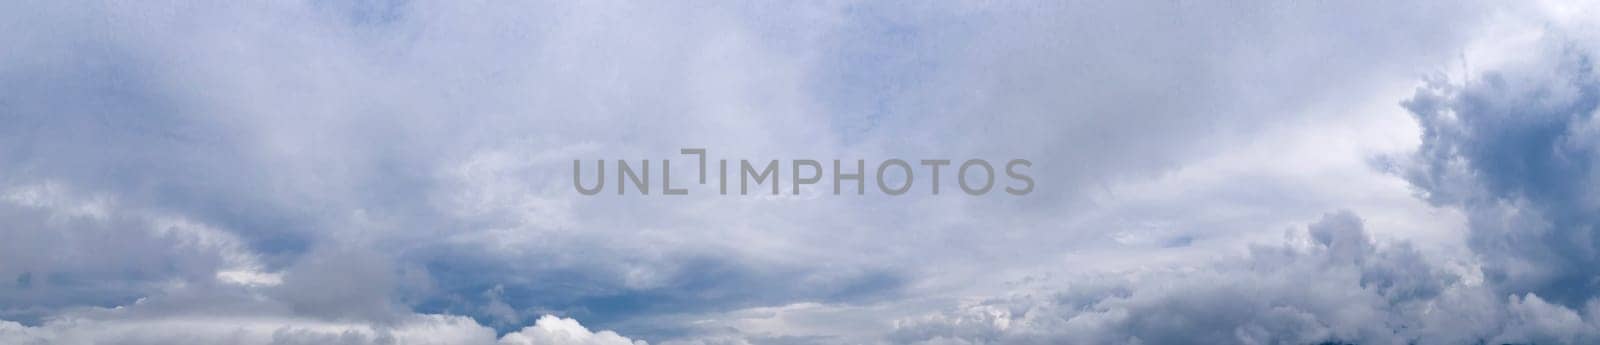 Panoramic view of blue sky with stormy clouds 